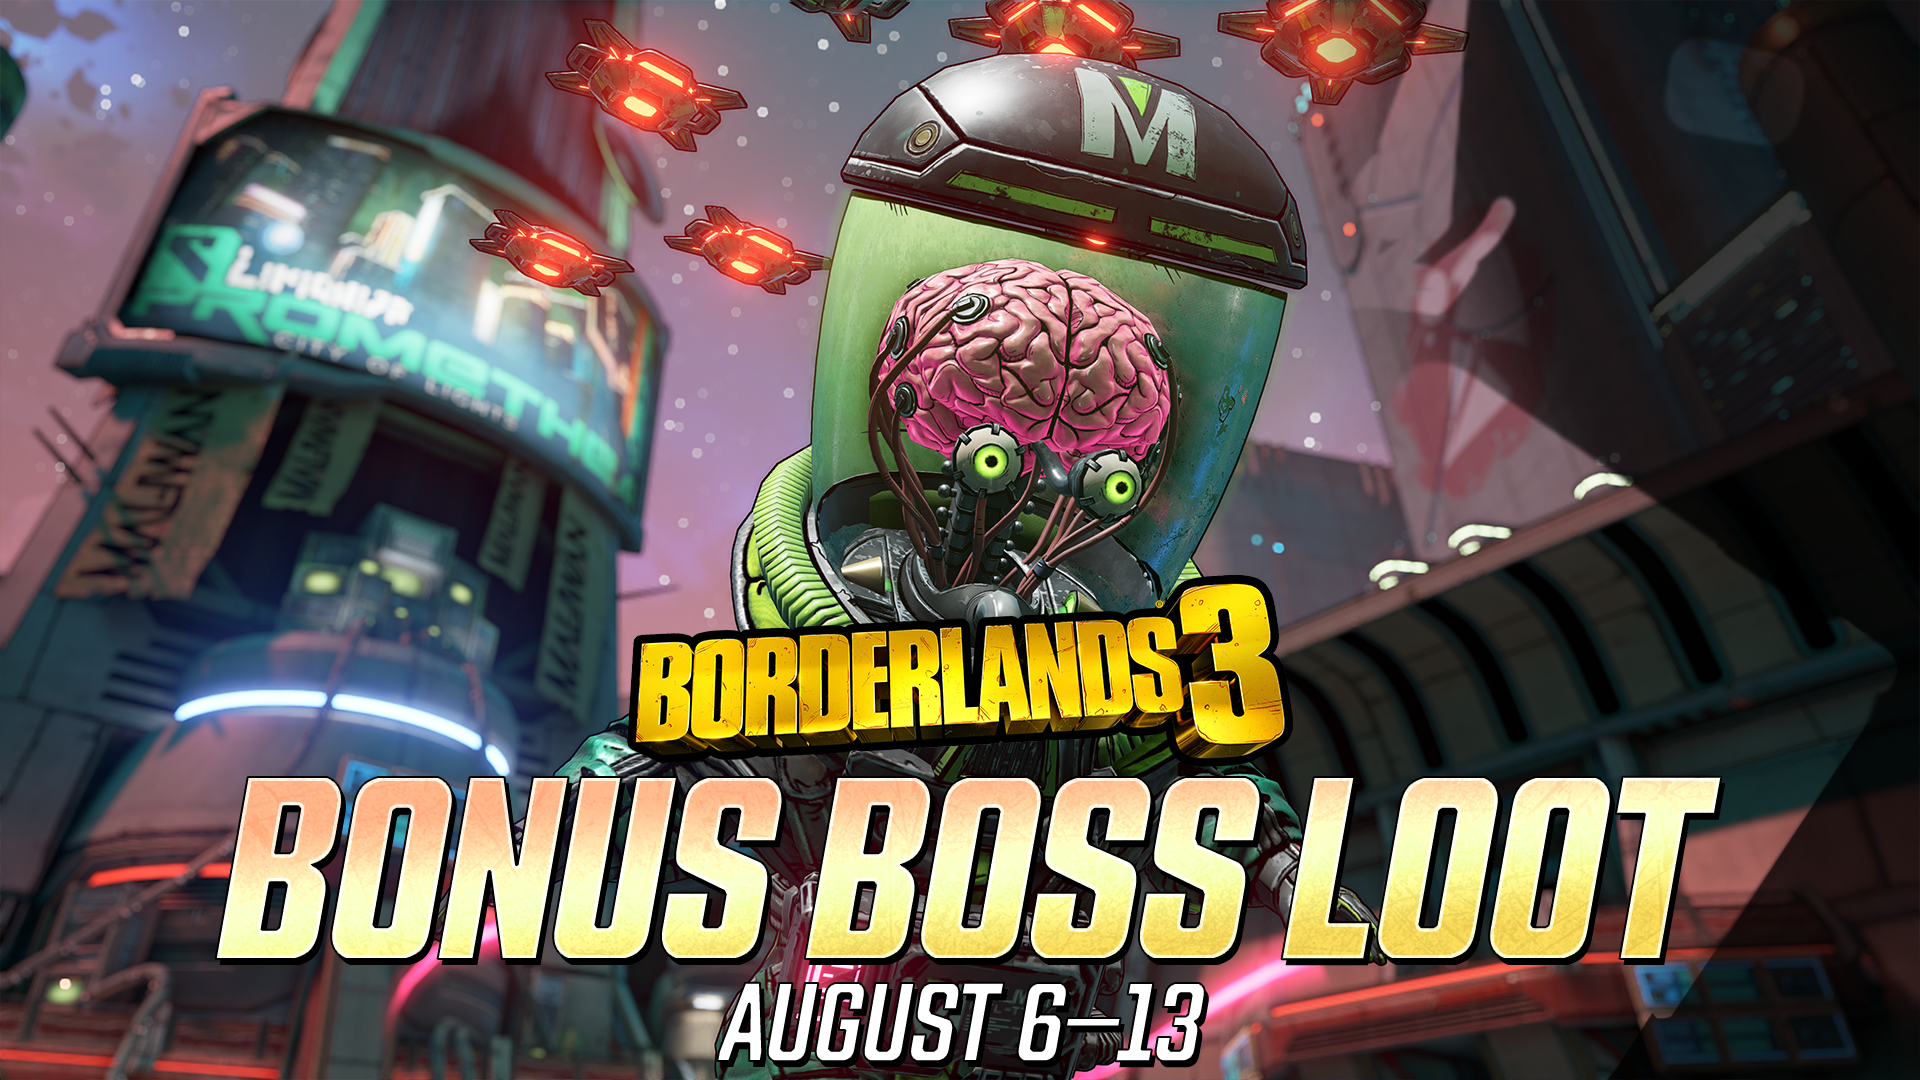 TVsæt cement Gå tilbage Borderlands on Twitter: "Boss Week's back baby! For a limited time, bosses  have an increased chance to drop Legendary loot in #Borderlands3! Learn  more: https://t.co/SxuN8B0G5o https://t.co/rjBHHAQtpK" / Twitter